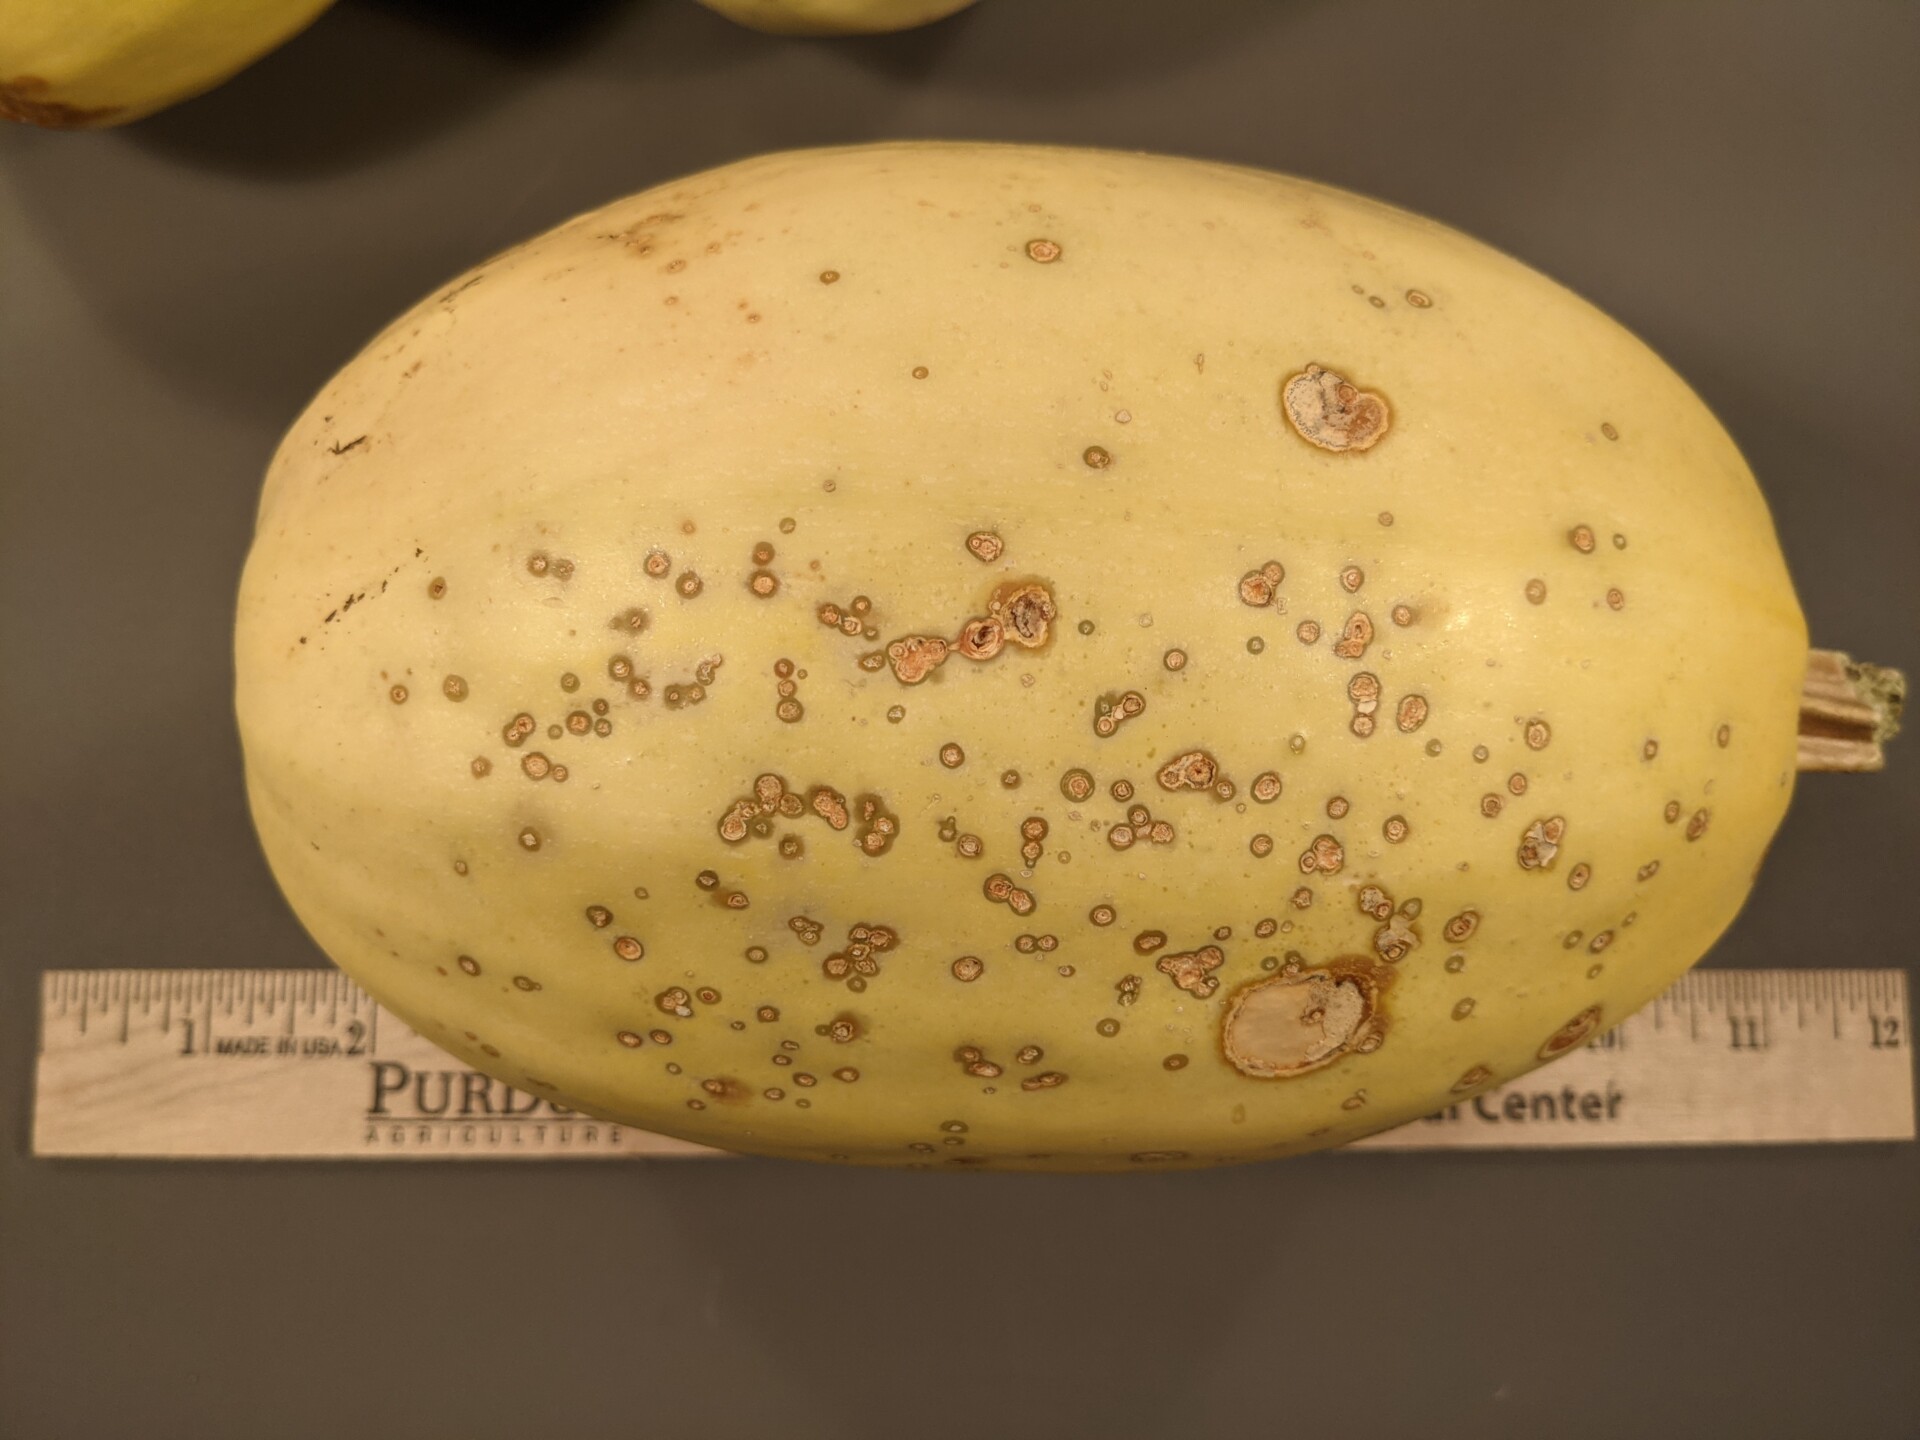   Bacterial spot of squash. Note scabby, light brown lesions with water-soaked margins